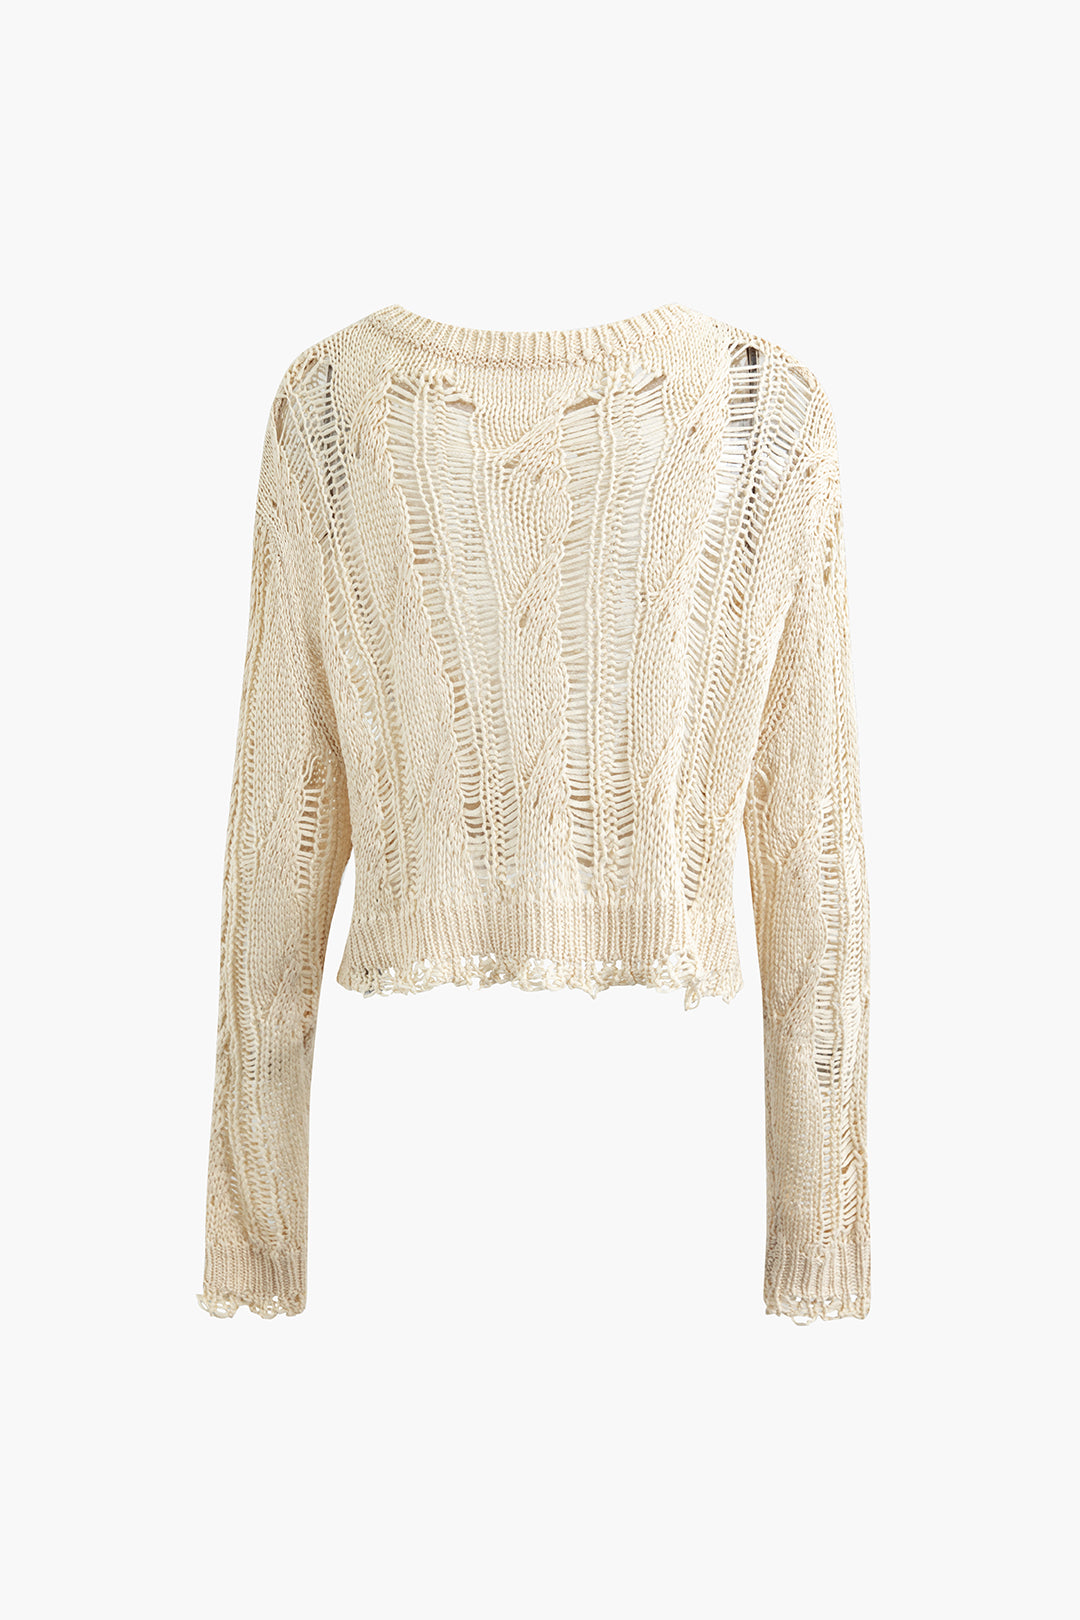 Distressed Laddered Knit Long Sleeve Crop Cover-Up Top